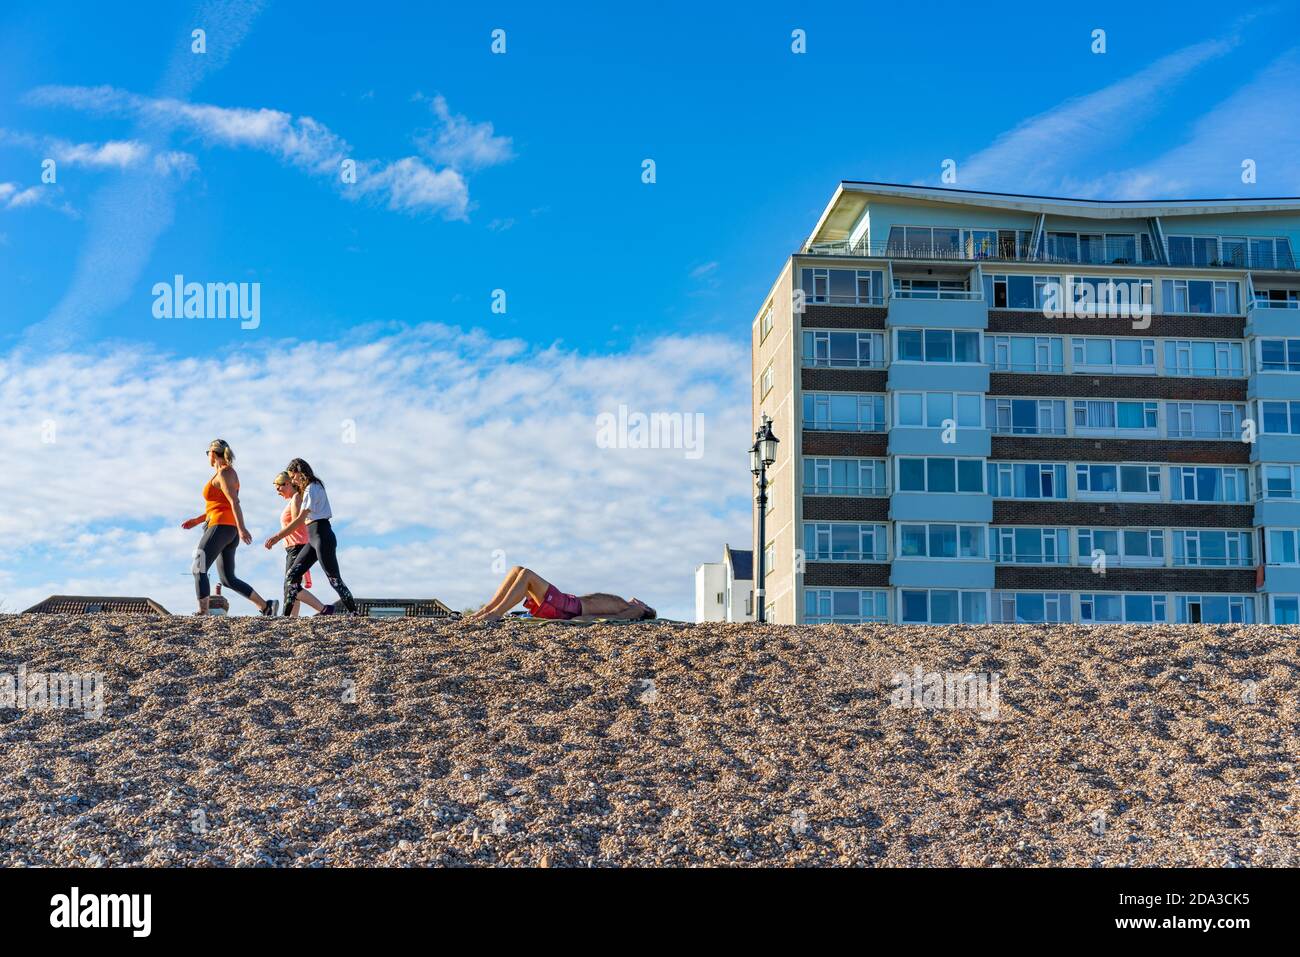 seaside landscape with male sunbather and a group of young people walking by on a summers days in Worthing. Stock Photo